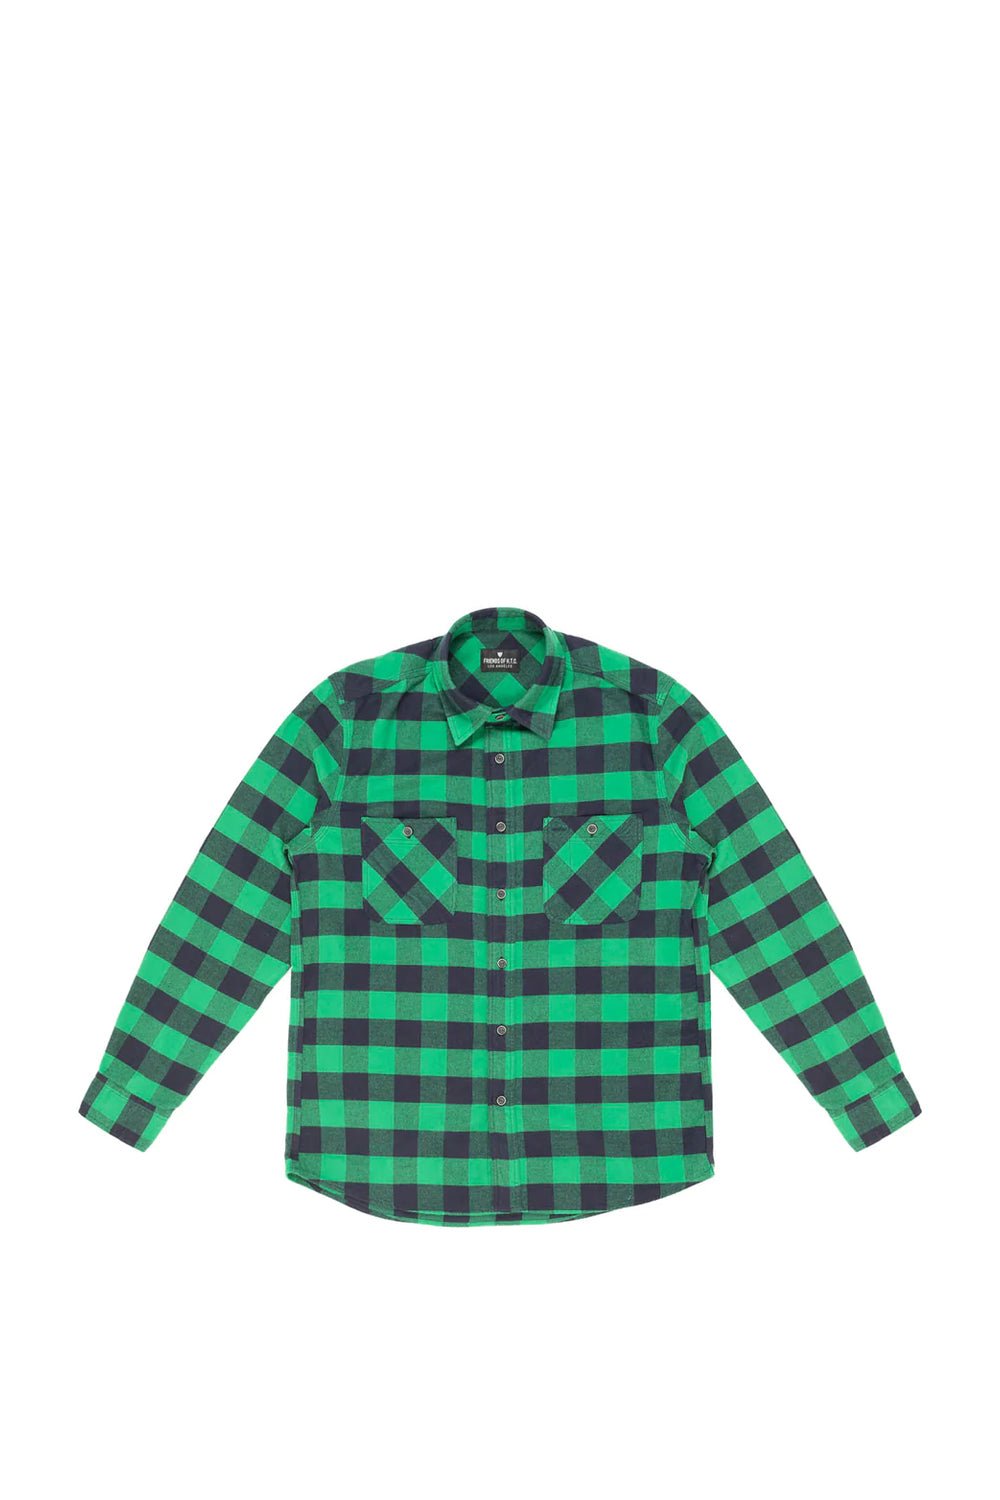 LOGO CHECK SHIRT Check cotton flannel shirt. Regular fit. Logo print on the back. Front button closure. Two brest pockets. 100% cotton. Made in Italy. HTC LOS ANGELES